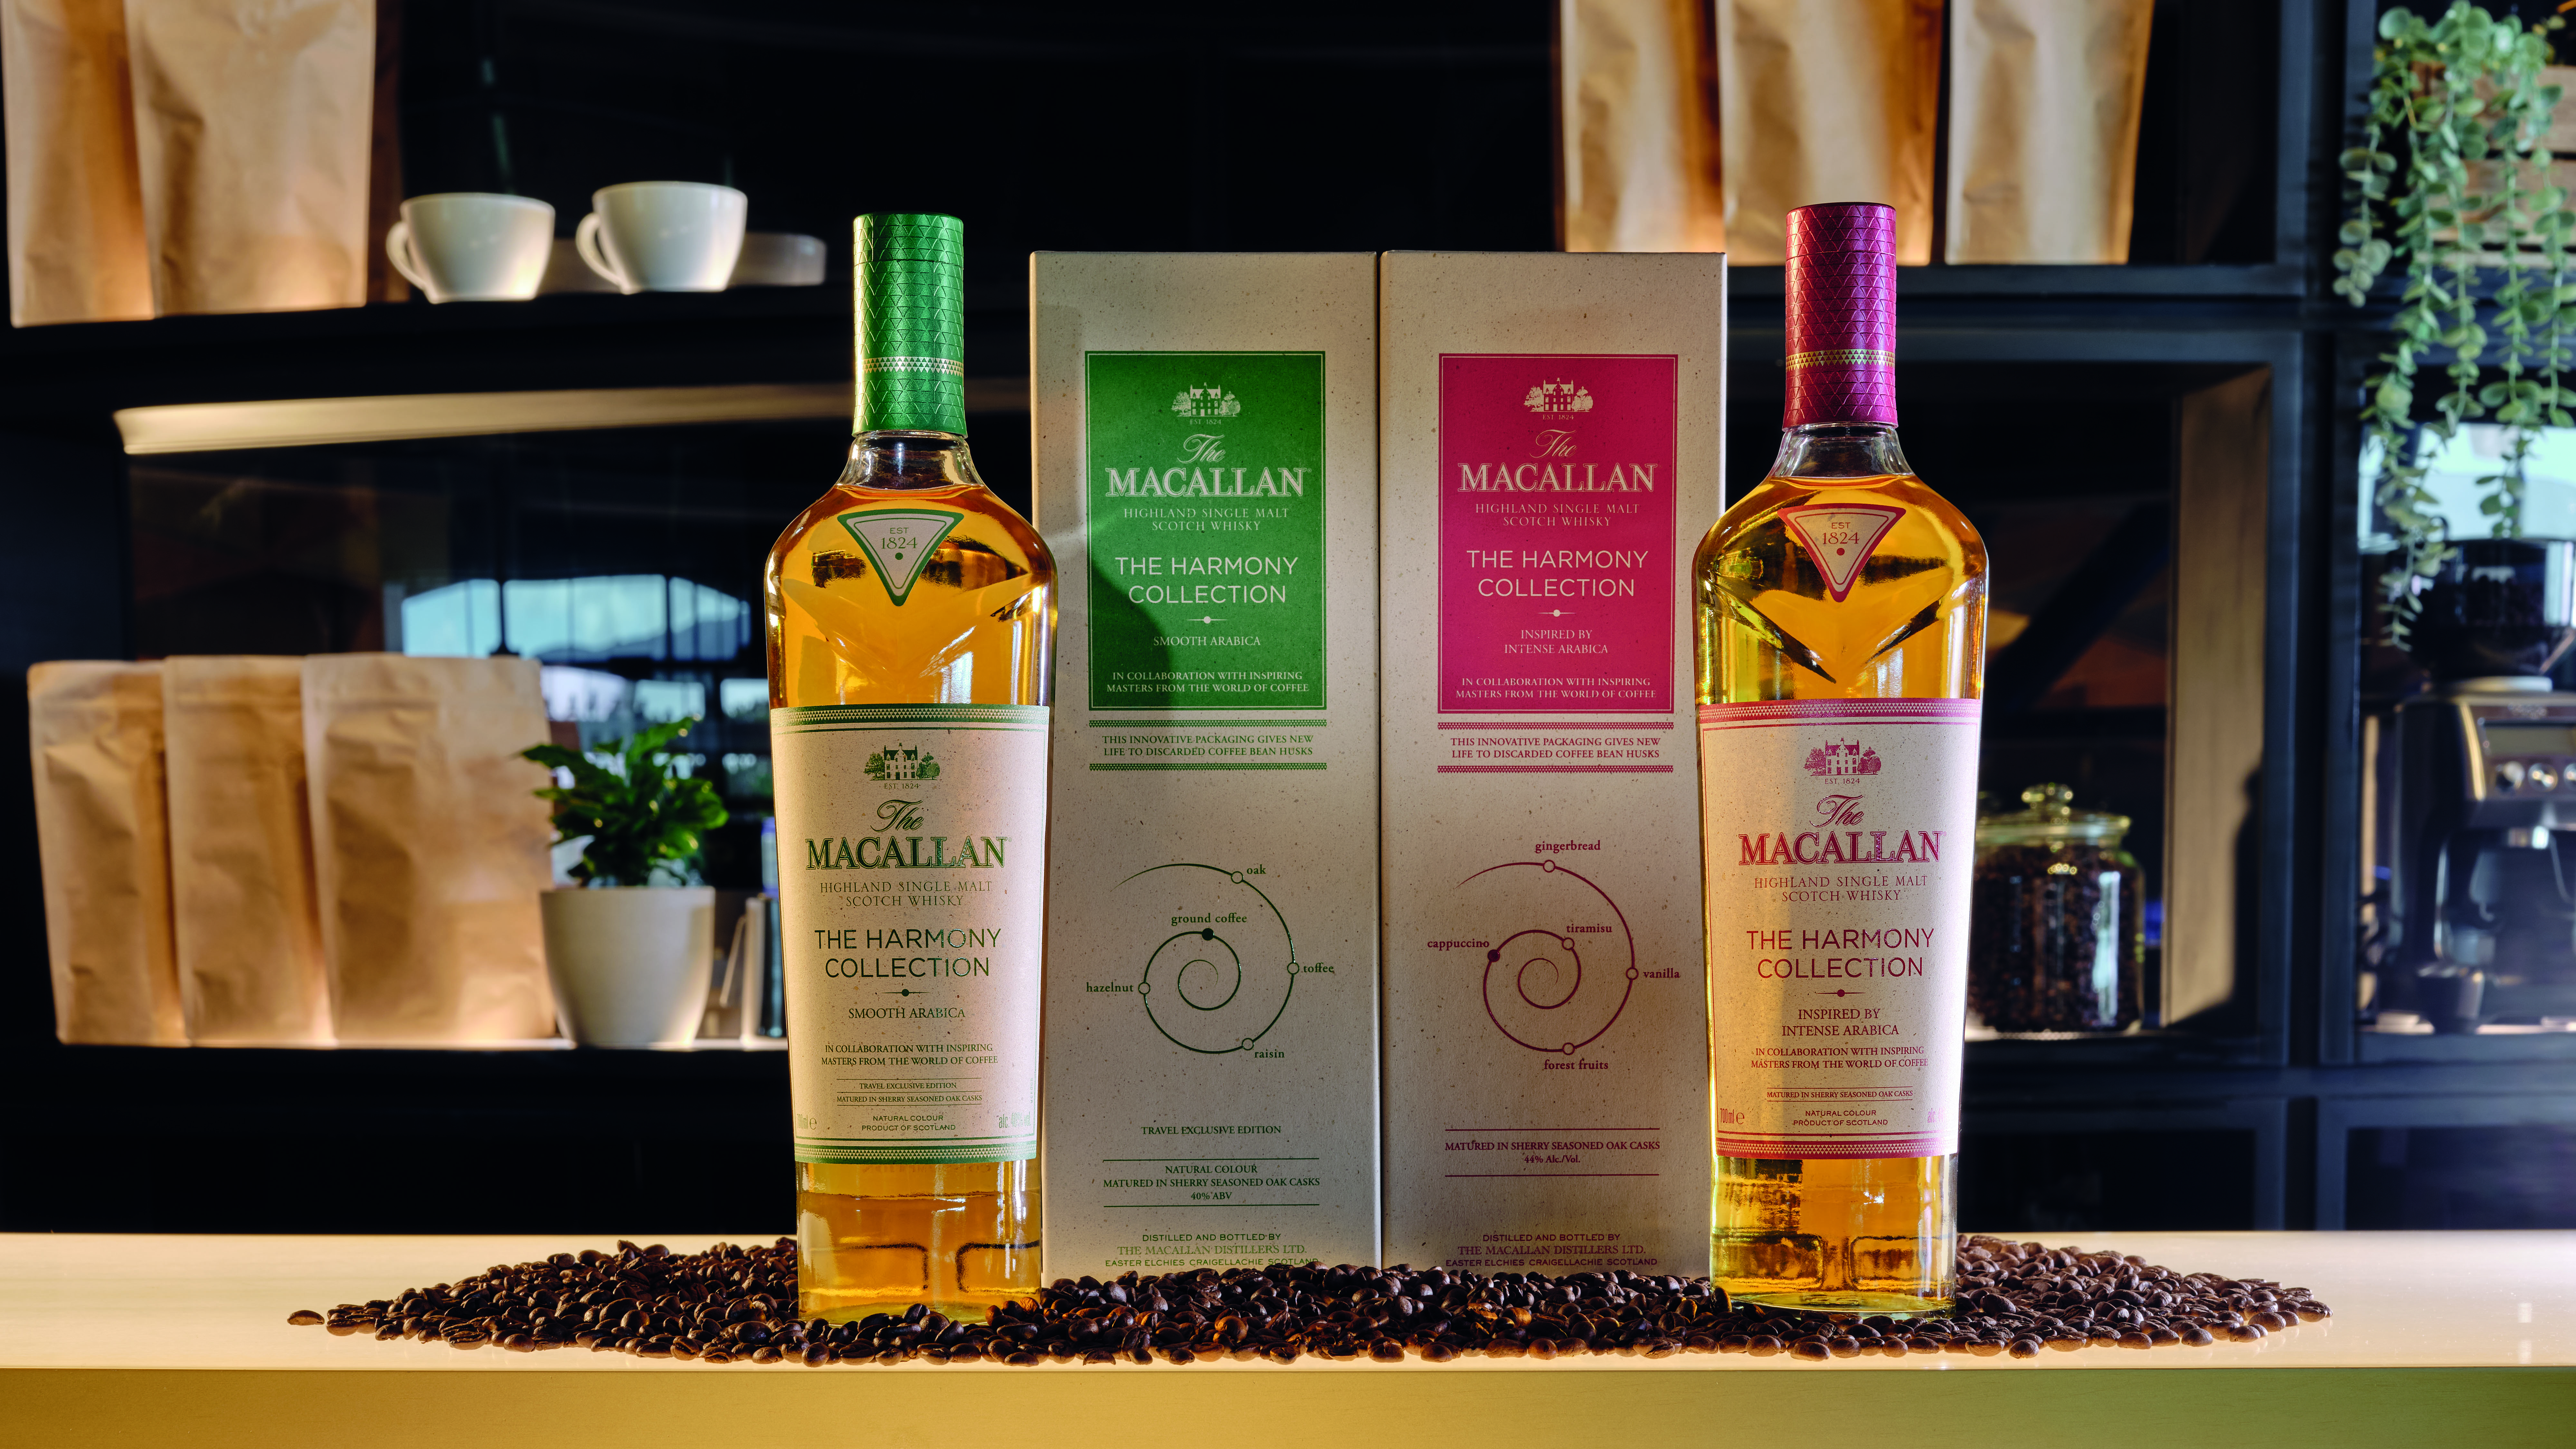 The Macallan Harmony Collection Inspired by Intense Arabica Smooth coffee whisky scotch single malt